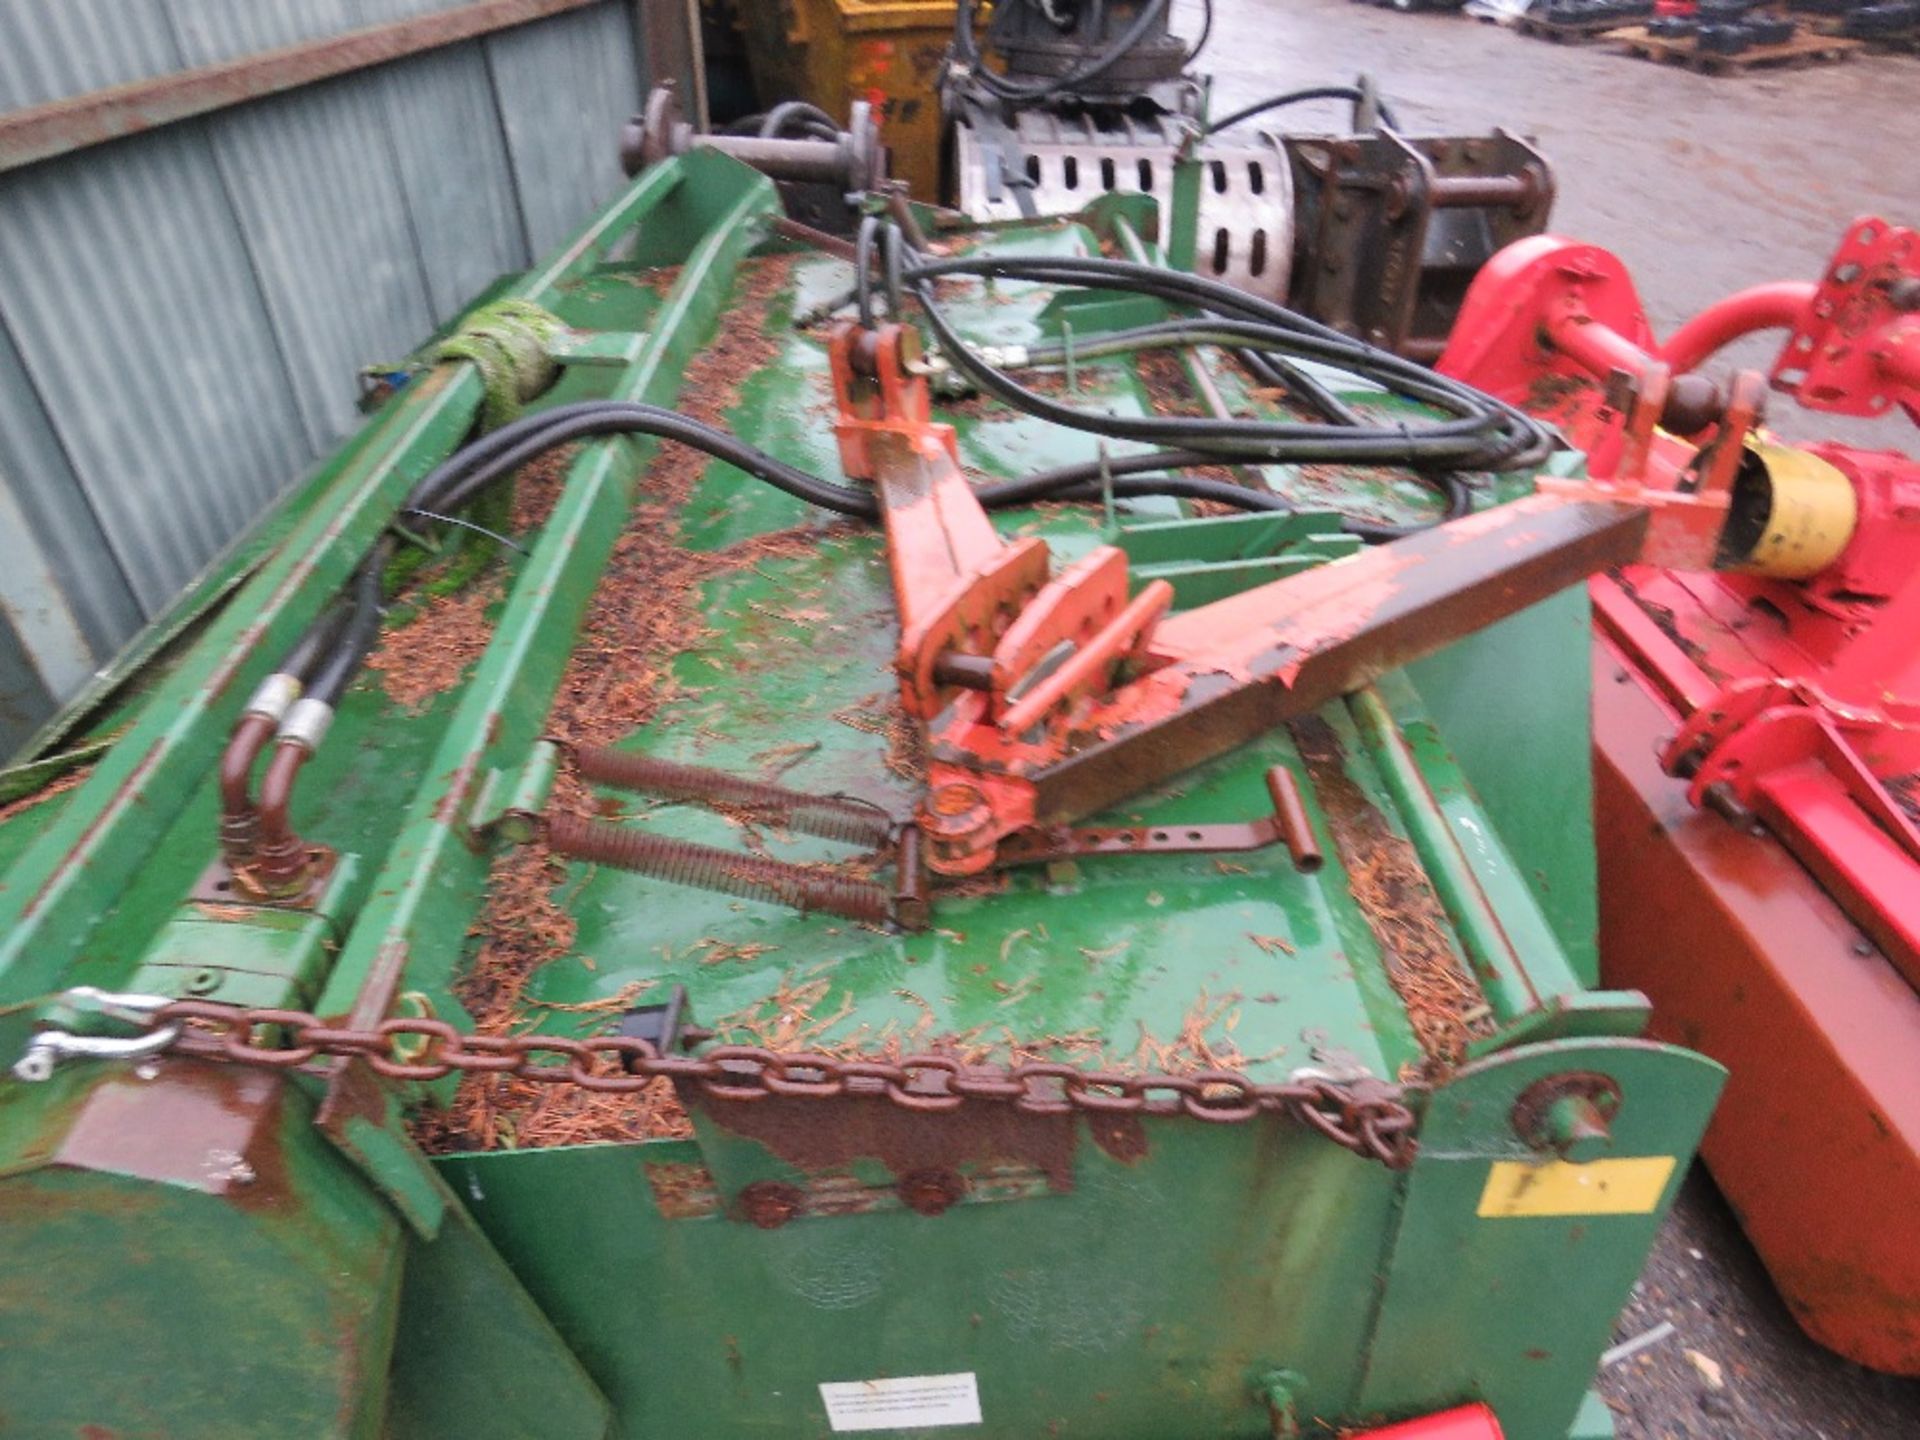 SUTON / GURNEY REEVE 2.2M WIDE HYDRAULIC POWERED YARD BRUSH WITH COLLECTOR AND GUTTER BRUSH. YEAR 20 - Image 5 of 7